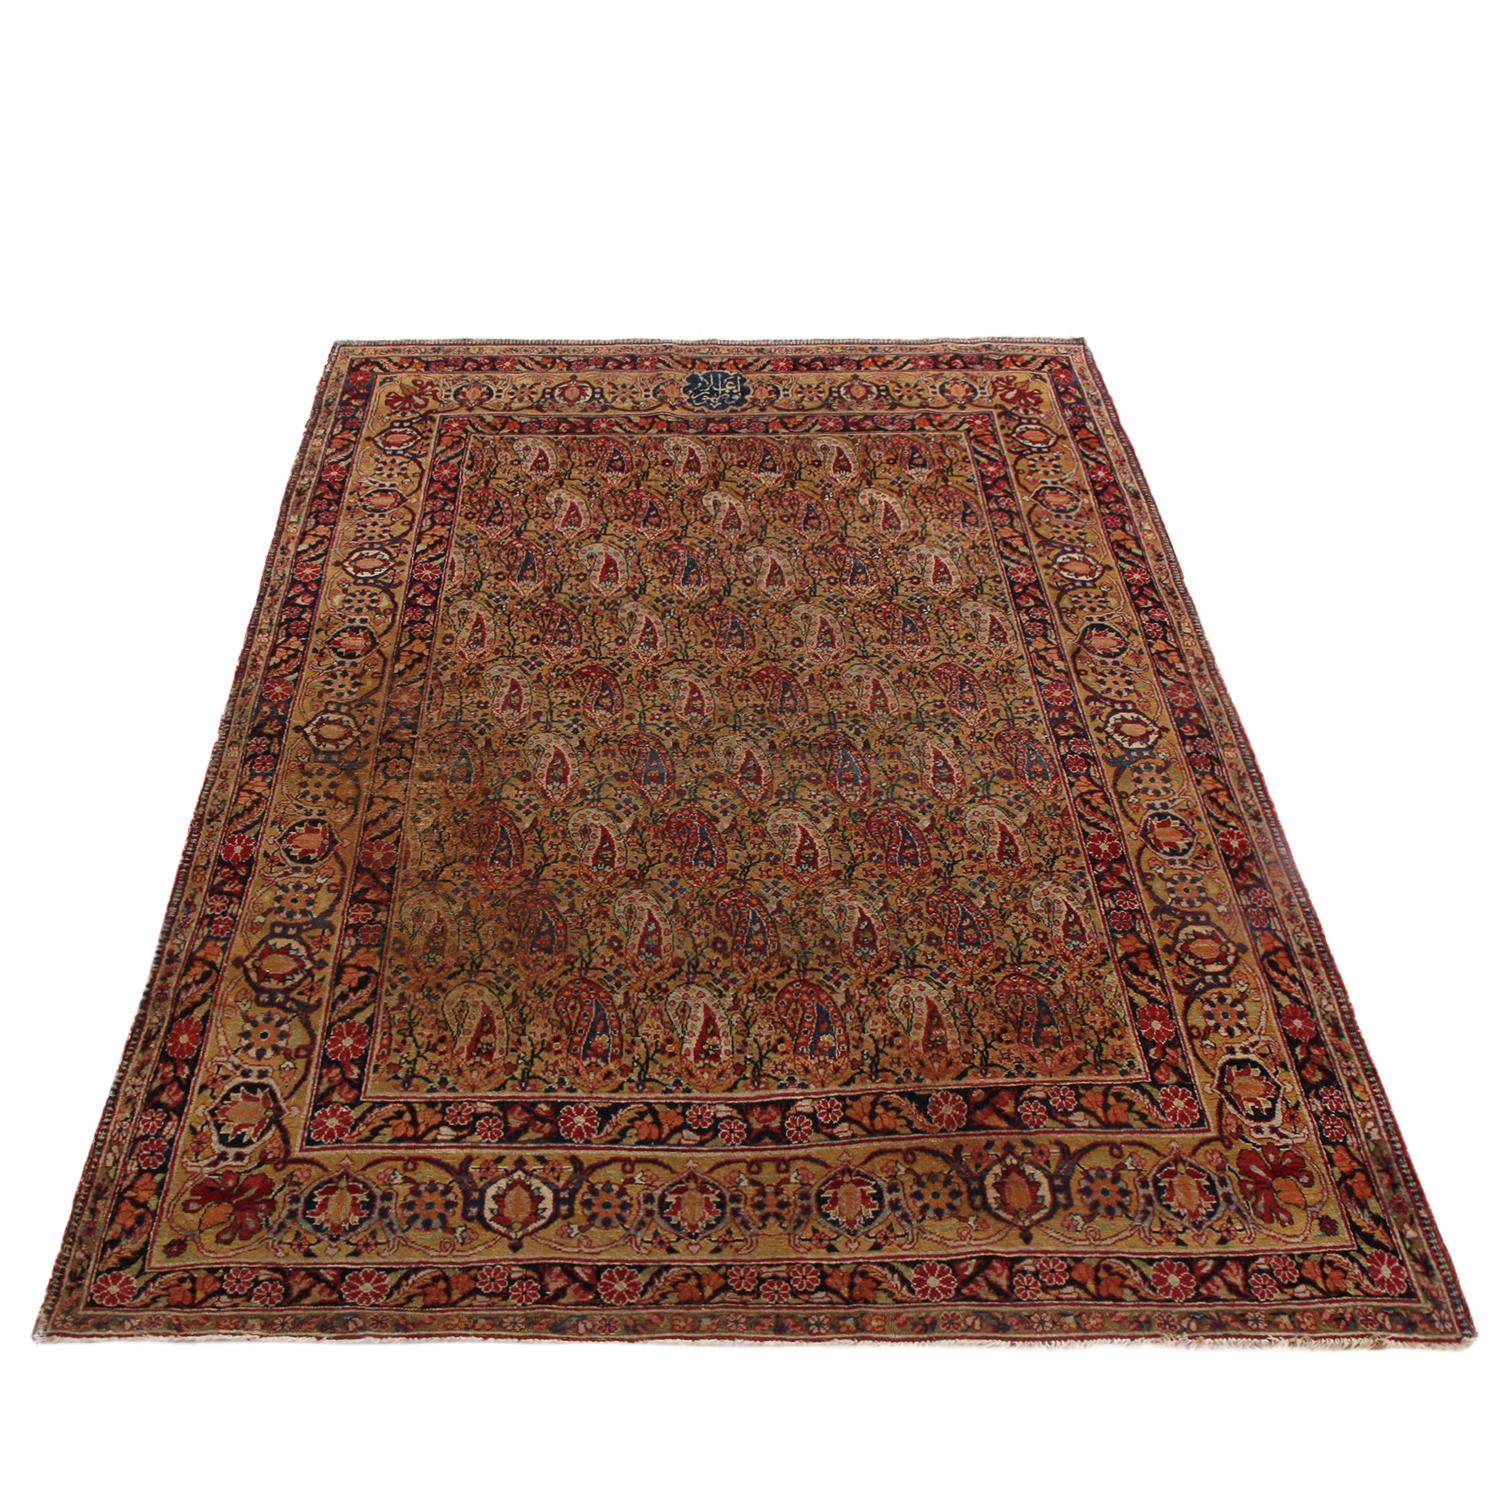 Hand knotted in high-quality wool originating from Persia in 1890, this antique Kerman Lavar rug hails from one of the most acclaimed cities of antique rug creation in several centuries, enjoying a distinct pair of sharply stylized boteh (paisley)